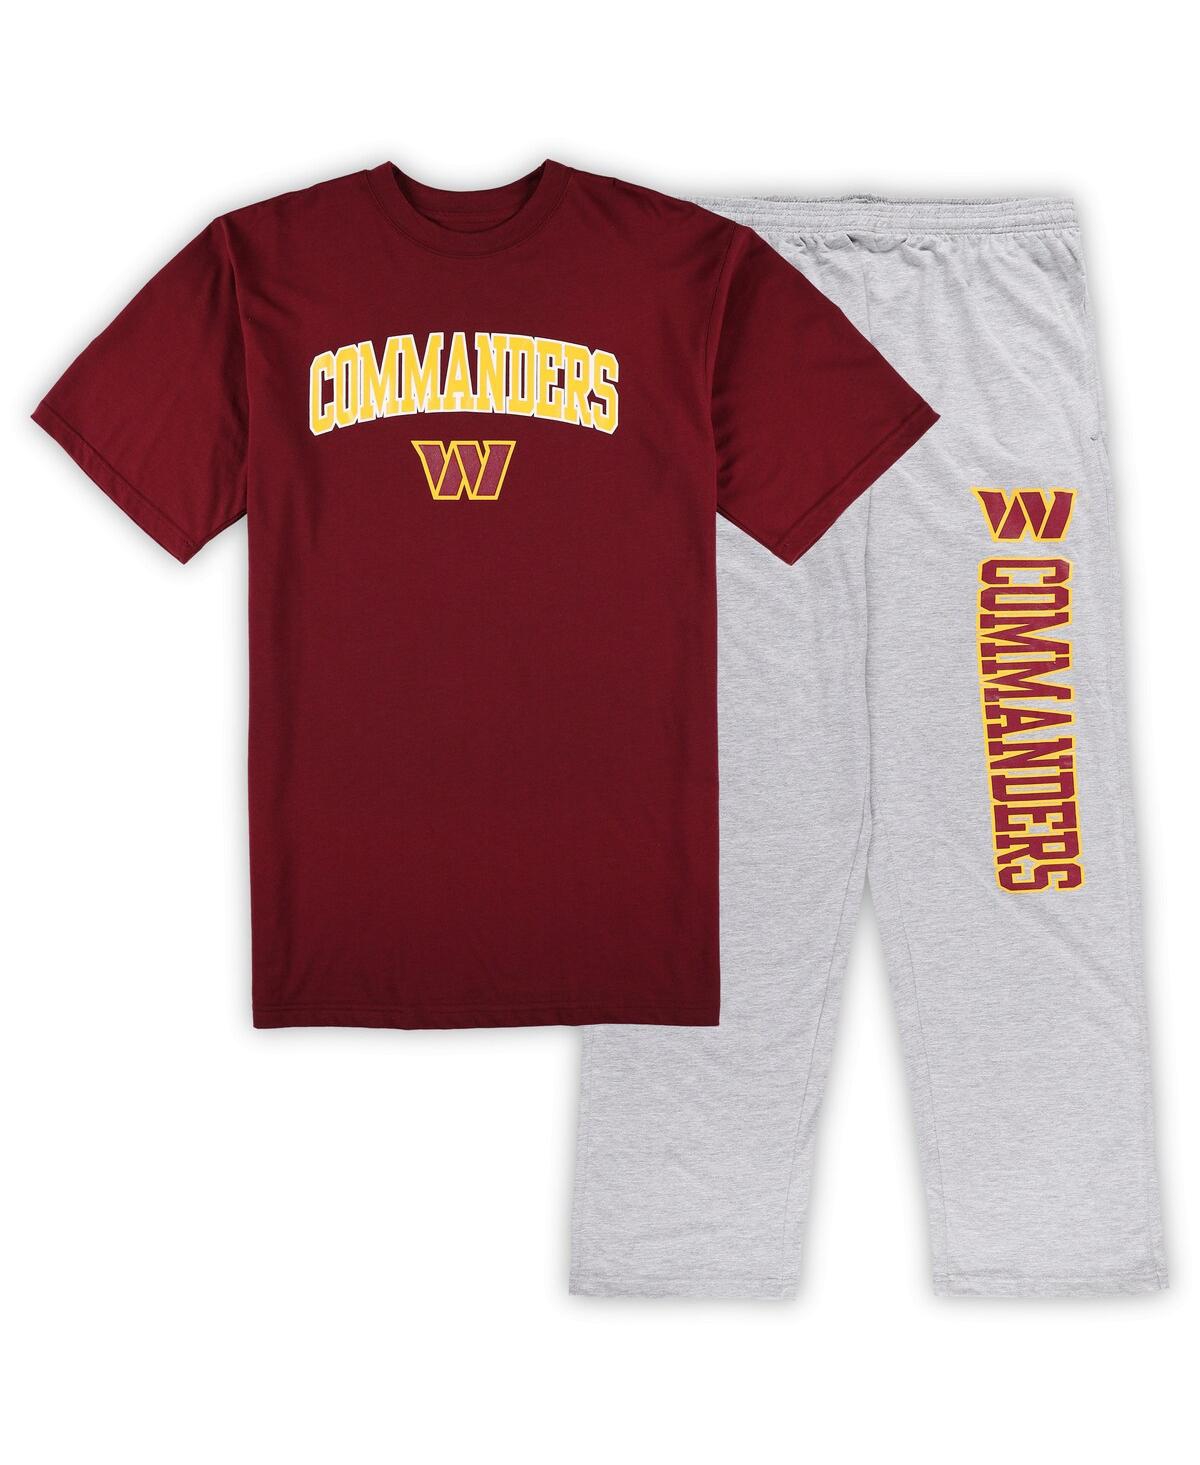 Concepts Sport Men's  Burgundy, Heather Gray Washington Commanders Big And Tall T-shirt And Pajama Pa In Burgundy,heather Gray